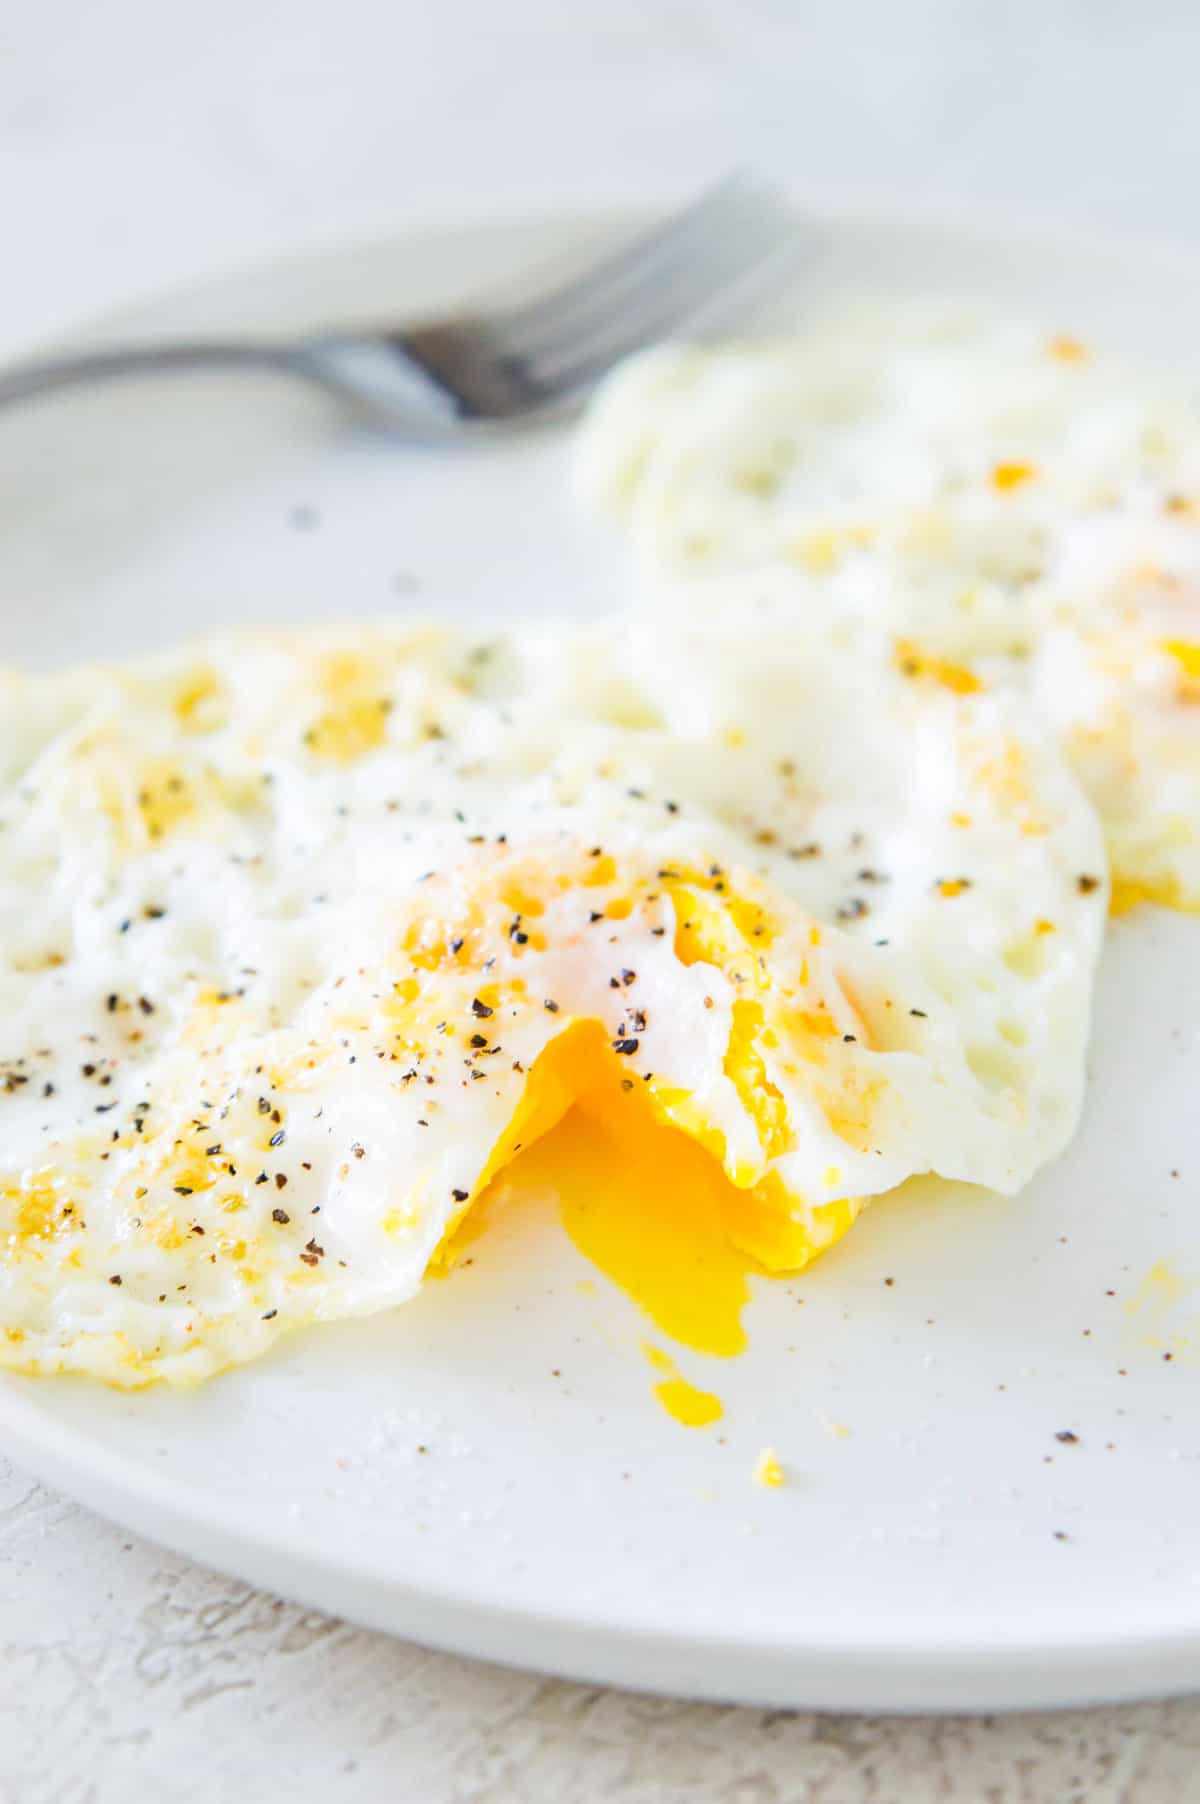 An over medium cooked egg on a plate with part of the yolk cut open.